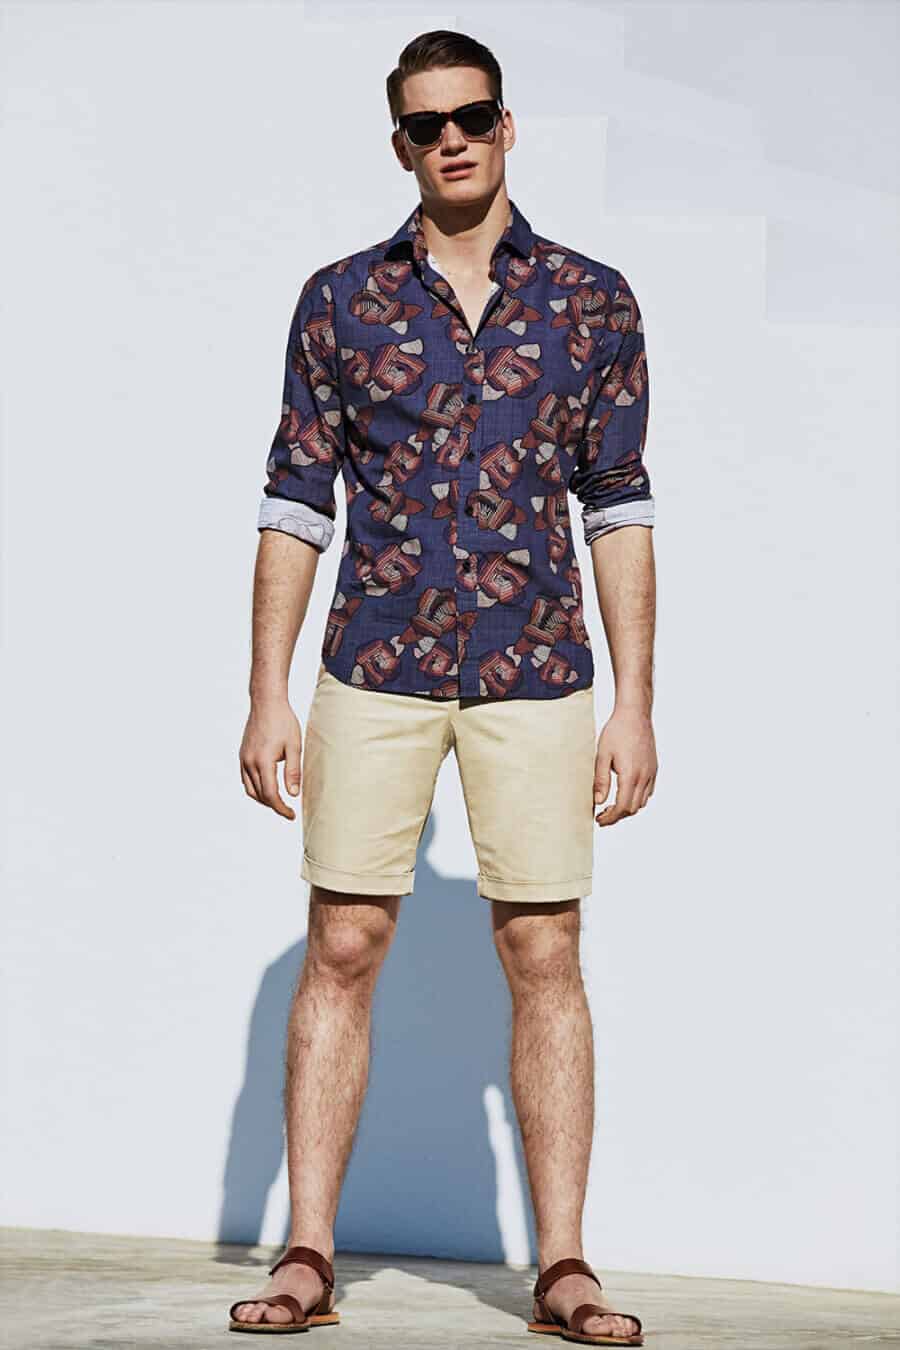 Men's chinos shorts, floral shirt and leather sandals summer outfit